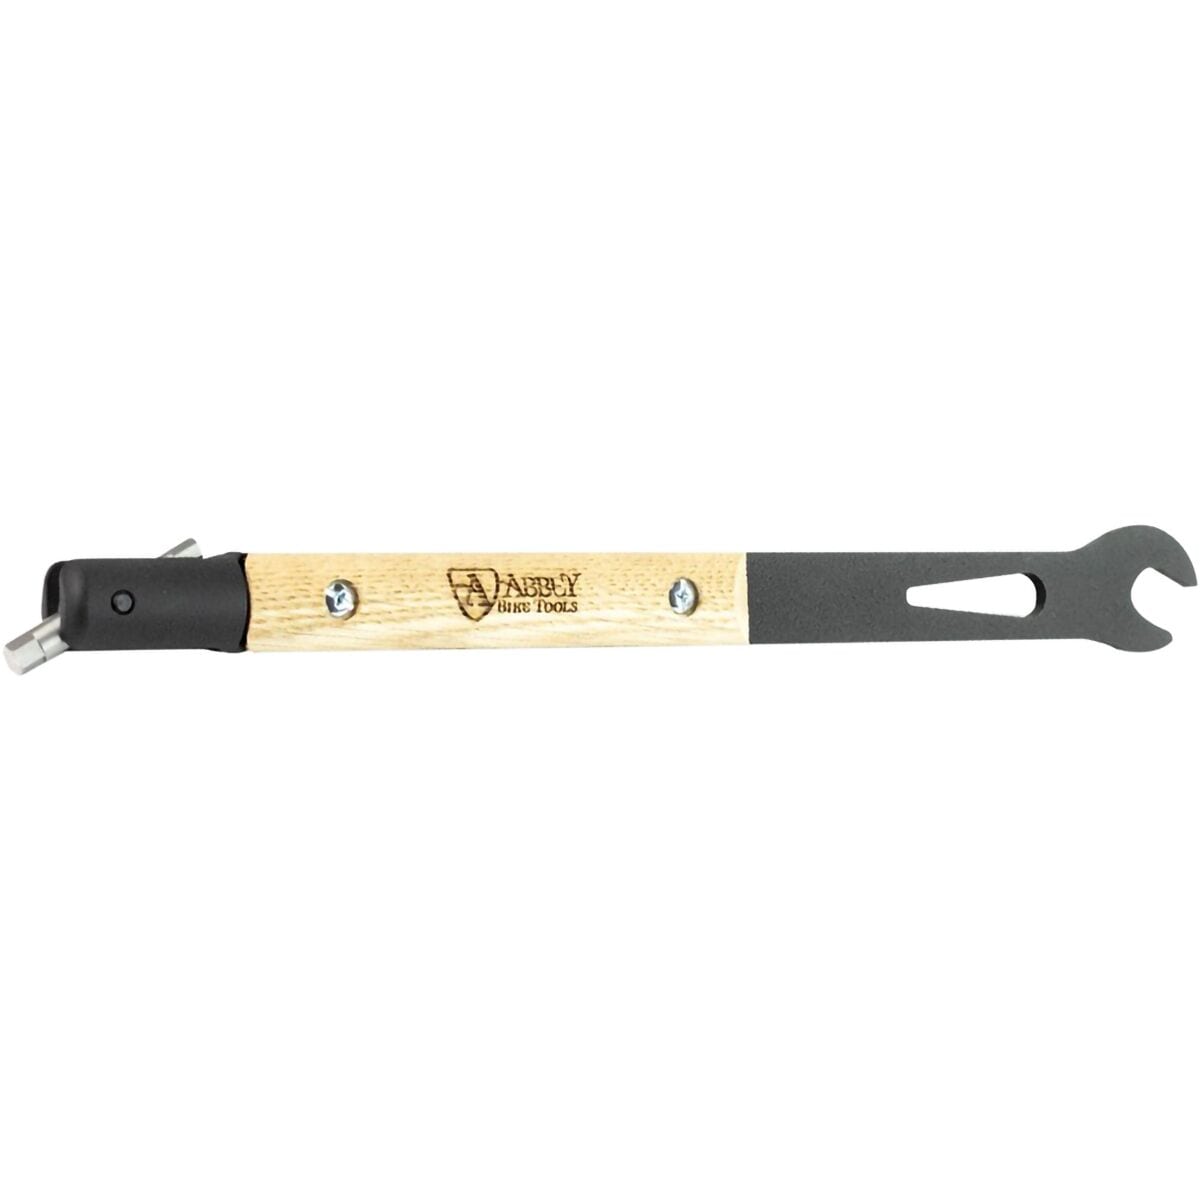 Abbey Bike Tools Shop Pedal Wrench